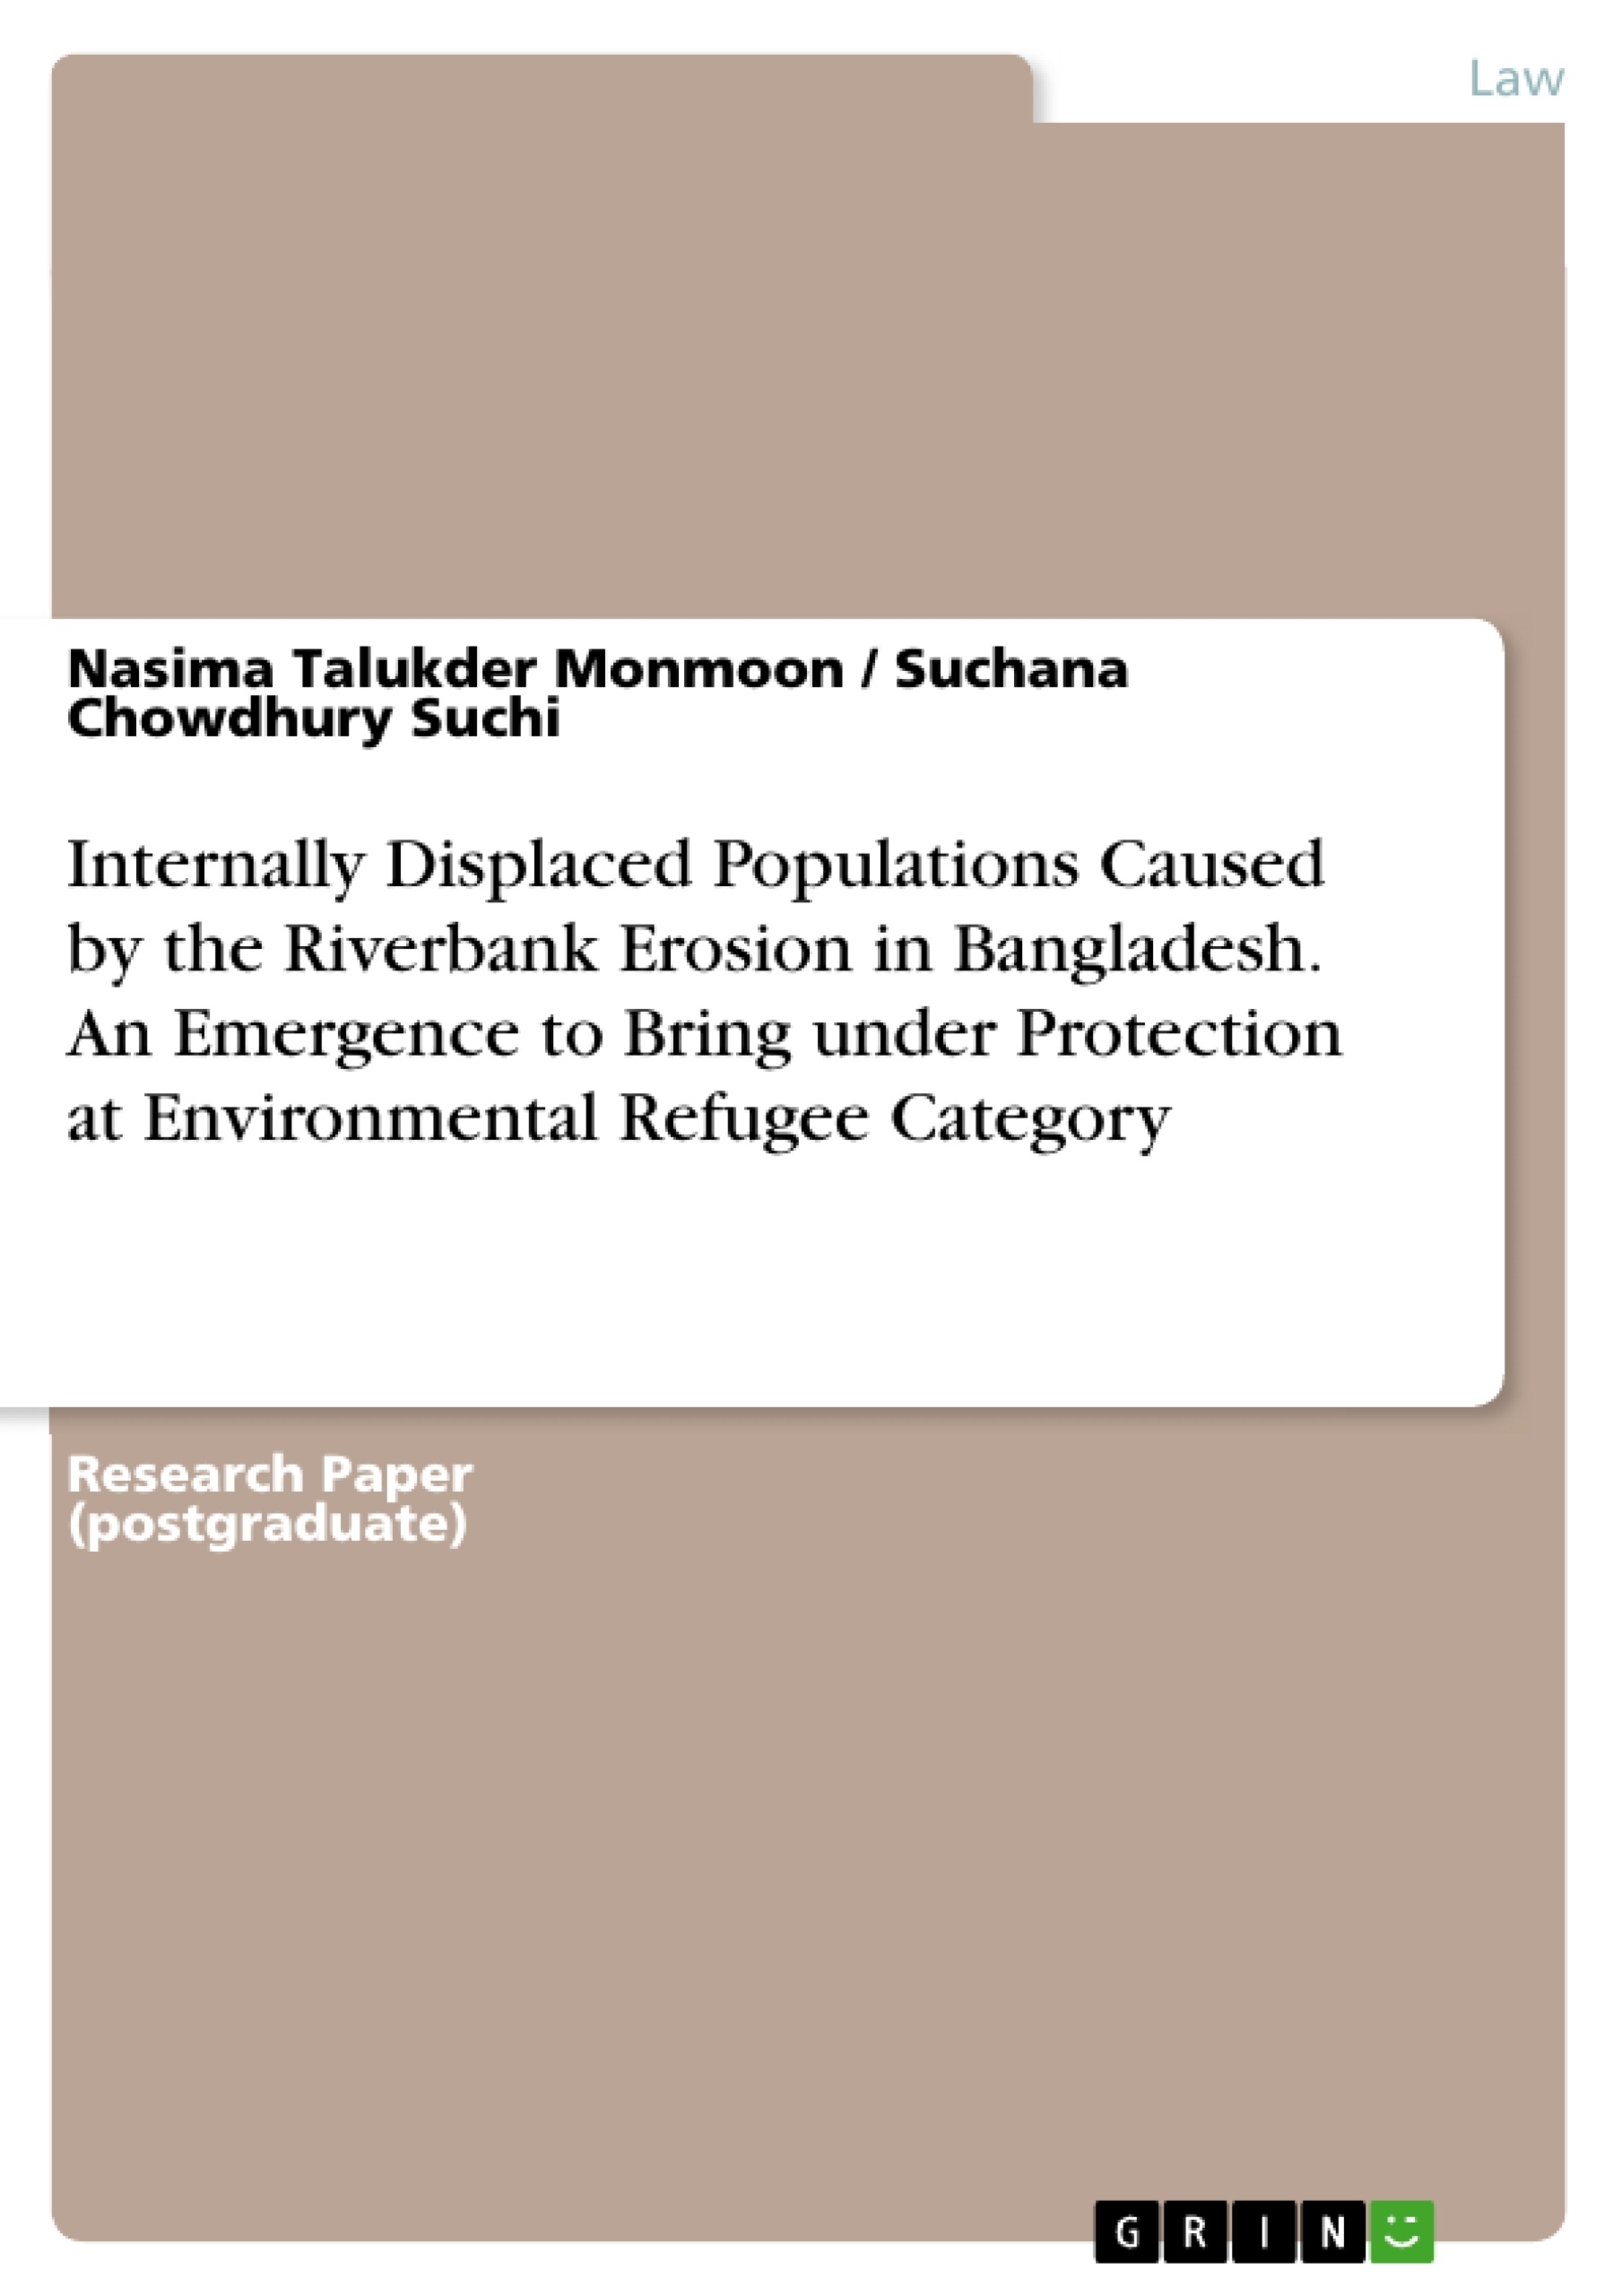 Title: Internally Displaced Populations Caused by the Riverbank Erosion in Bangladesh. An Emergence to Bring under Protection at Environmental Refugee Category